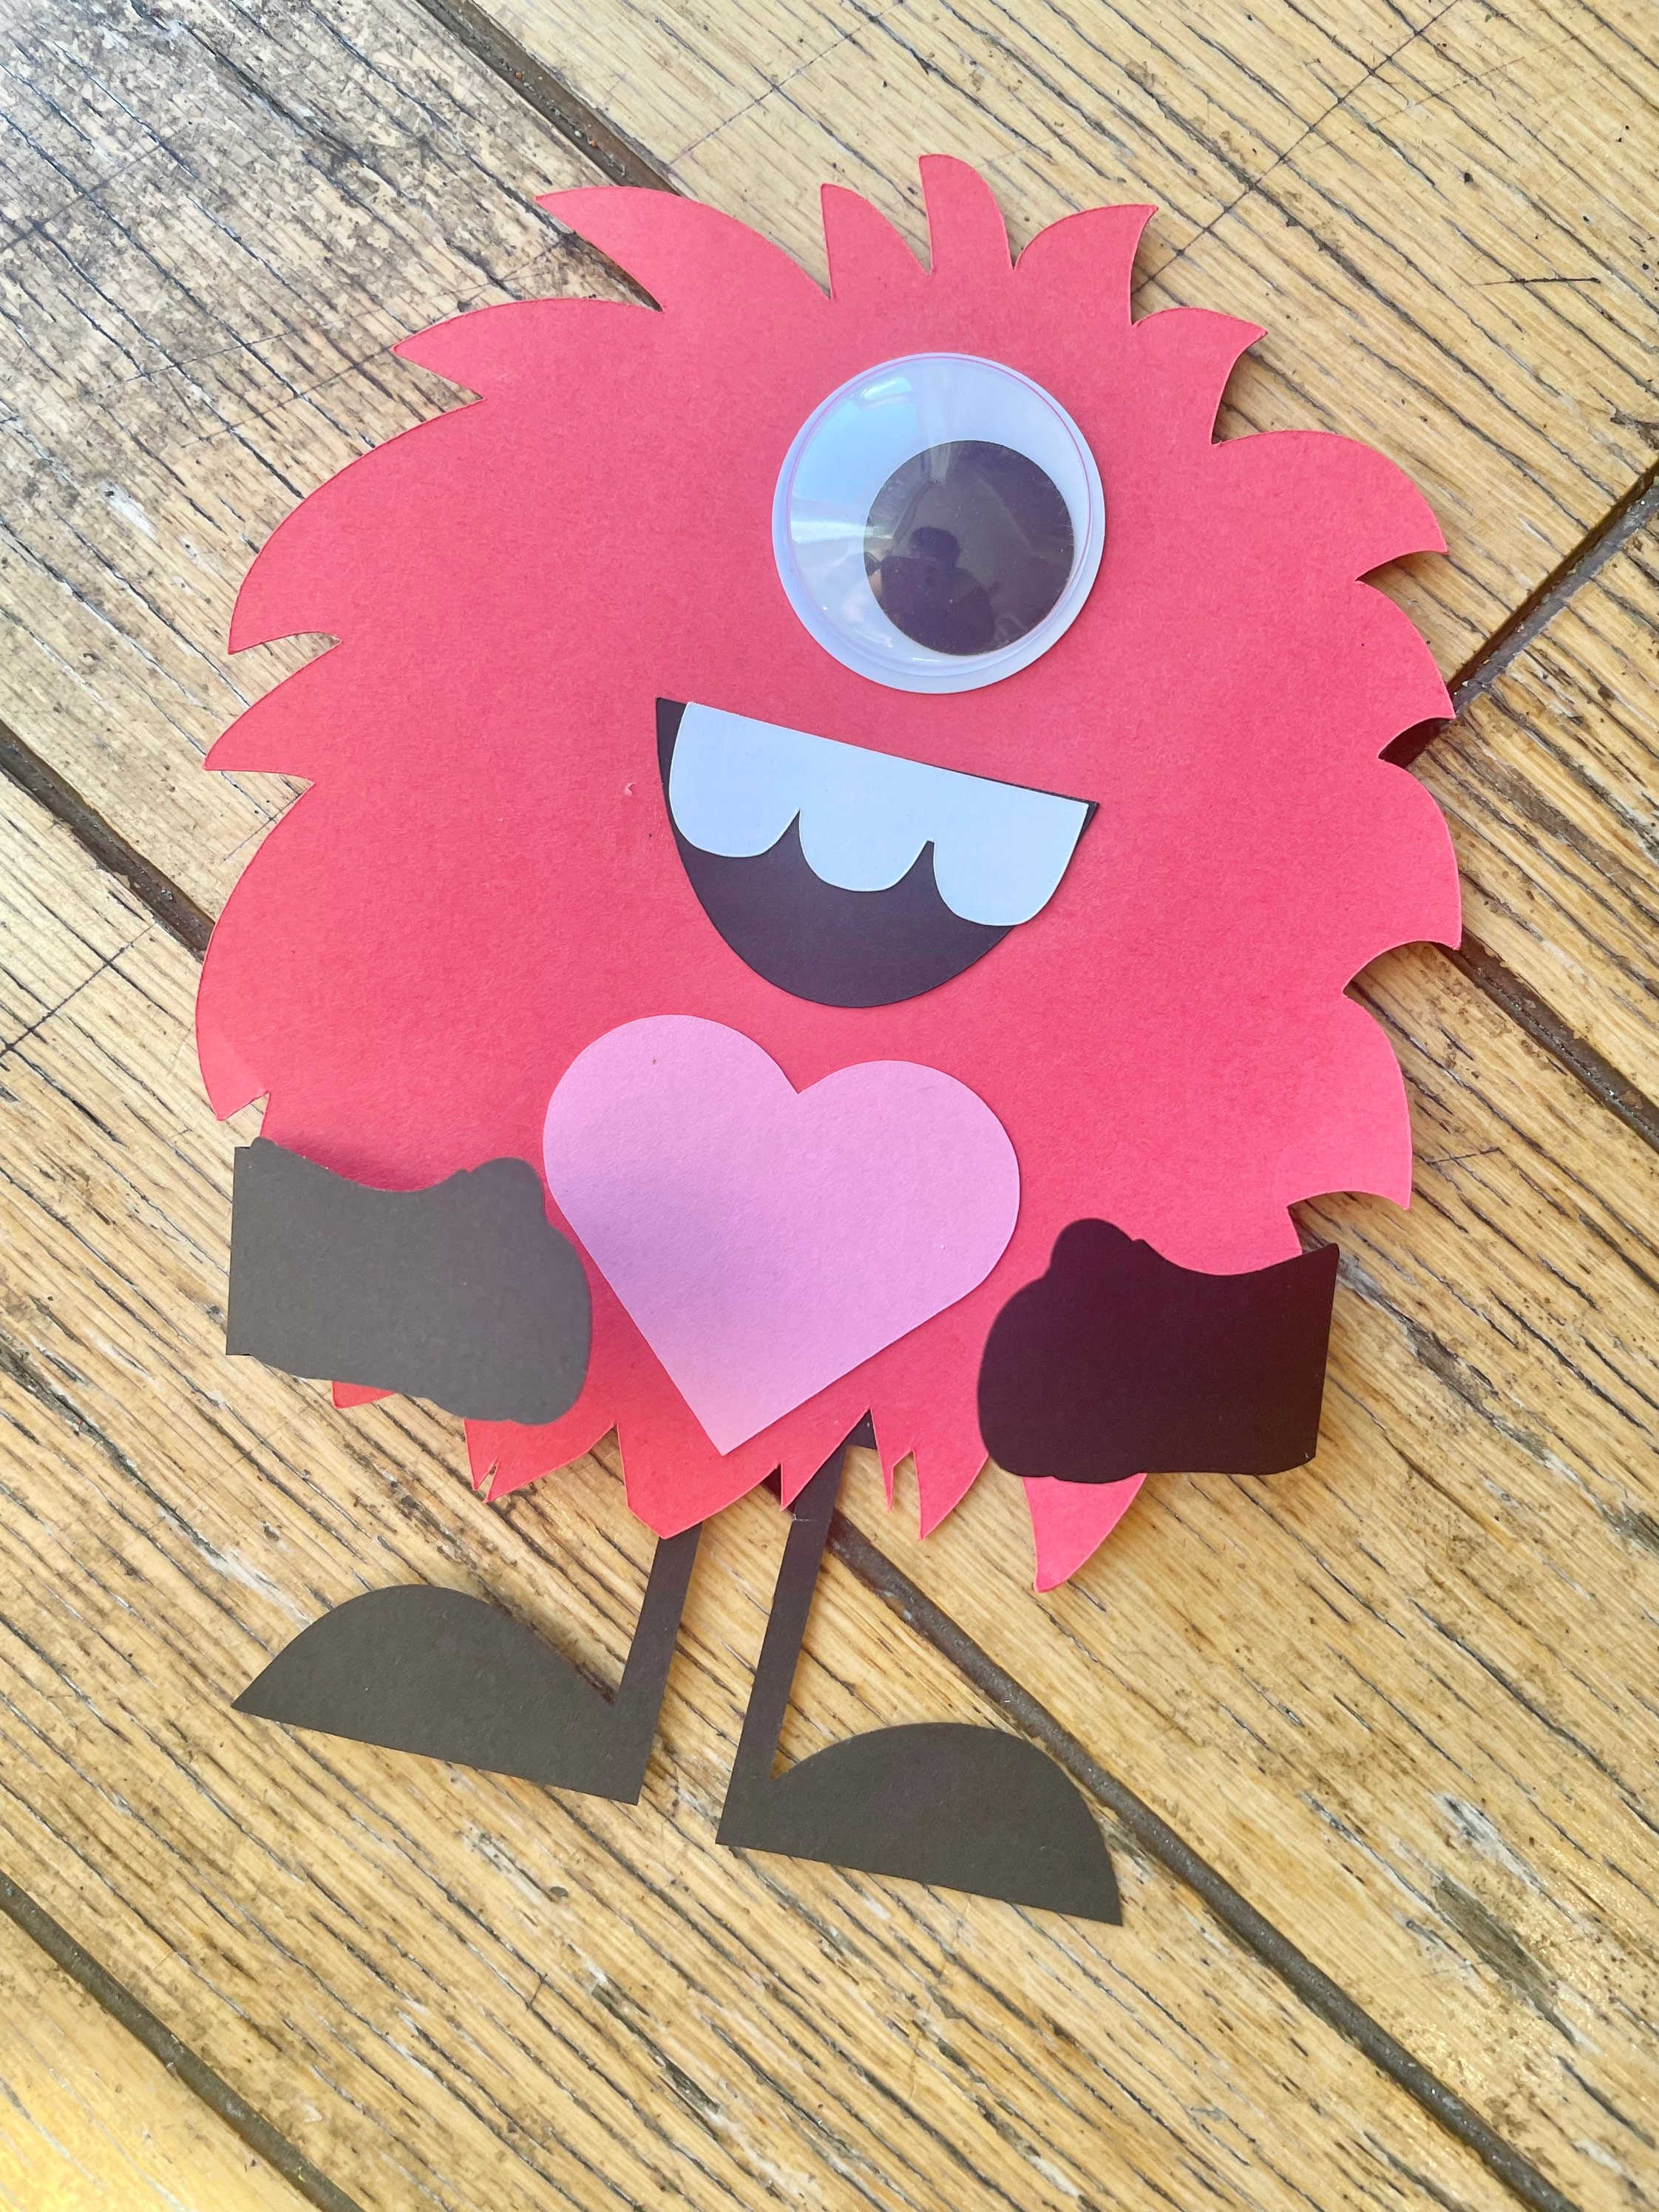 I Love You To Pieces Valentine's Day Craft for Kids - Taming Little Monsters